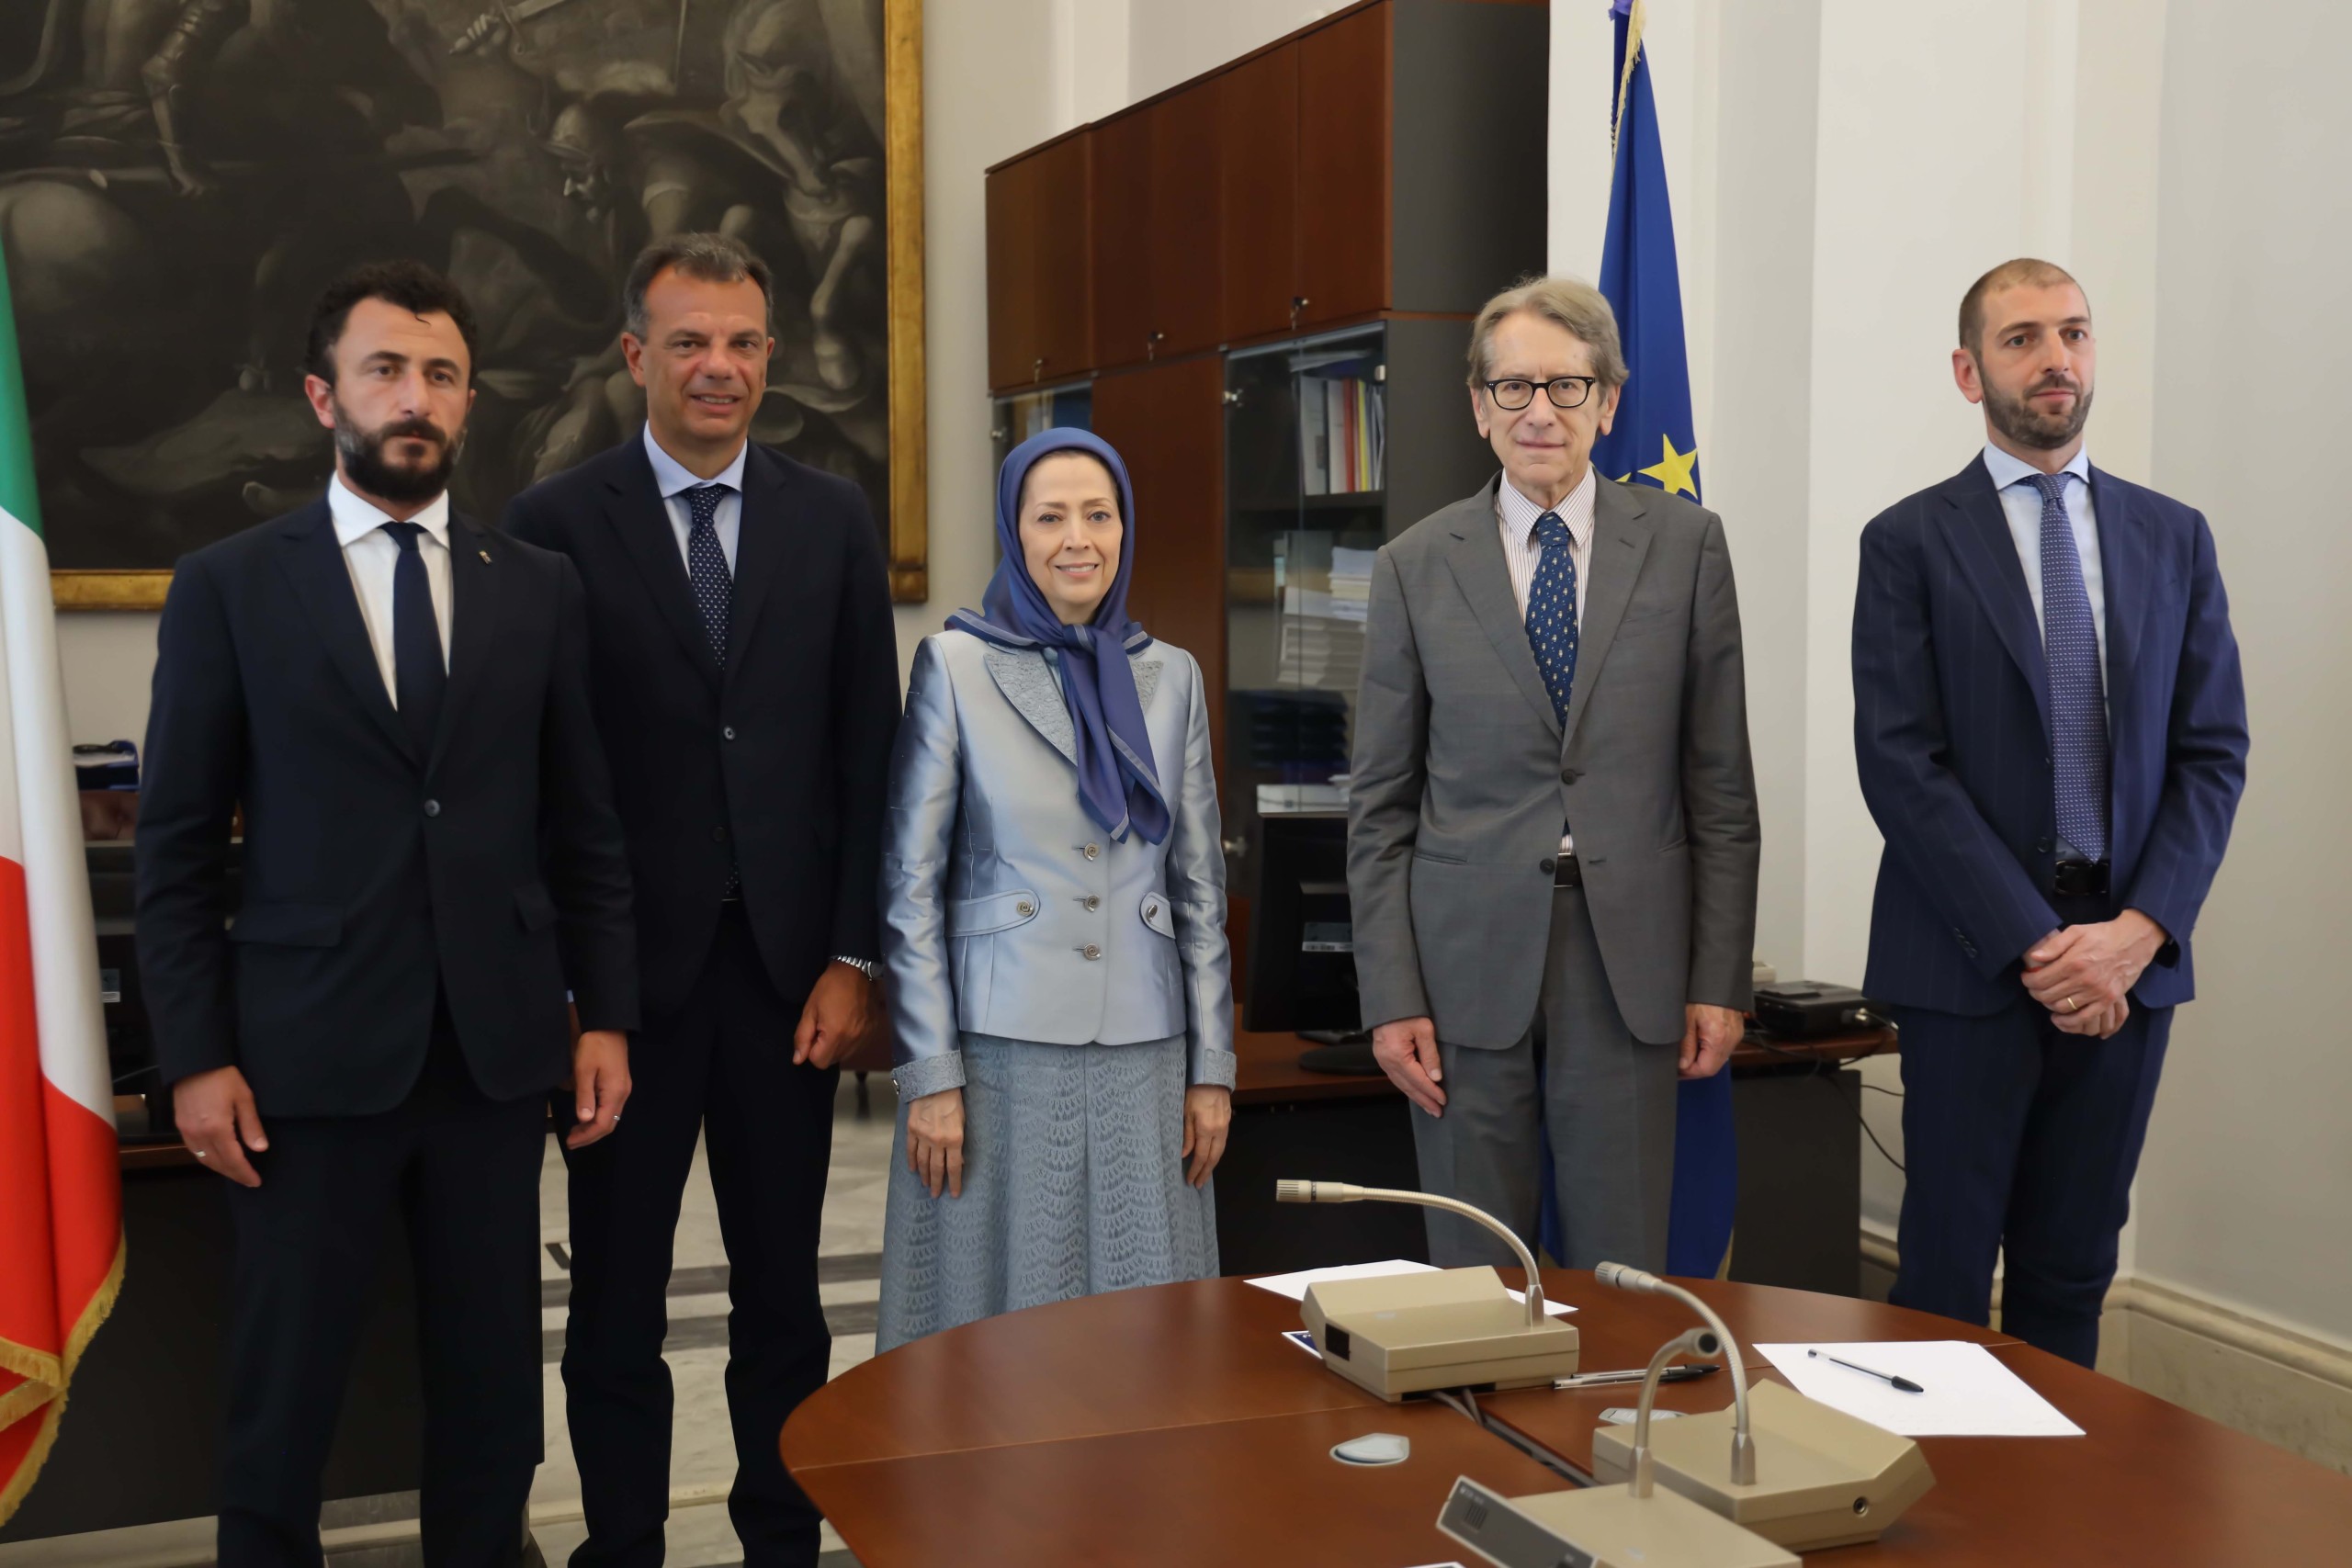  meeting-with-members-of-the-italian-parliaments-fa-committee